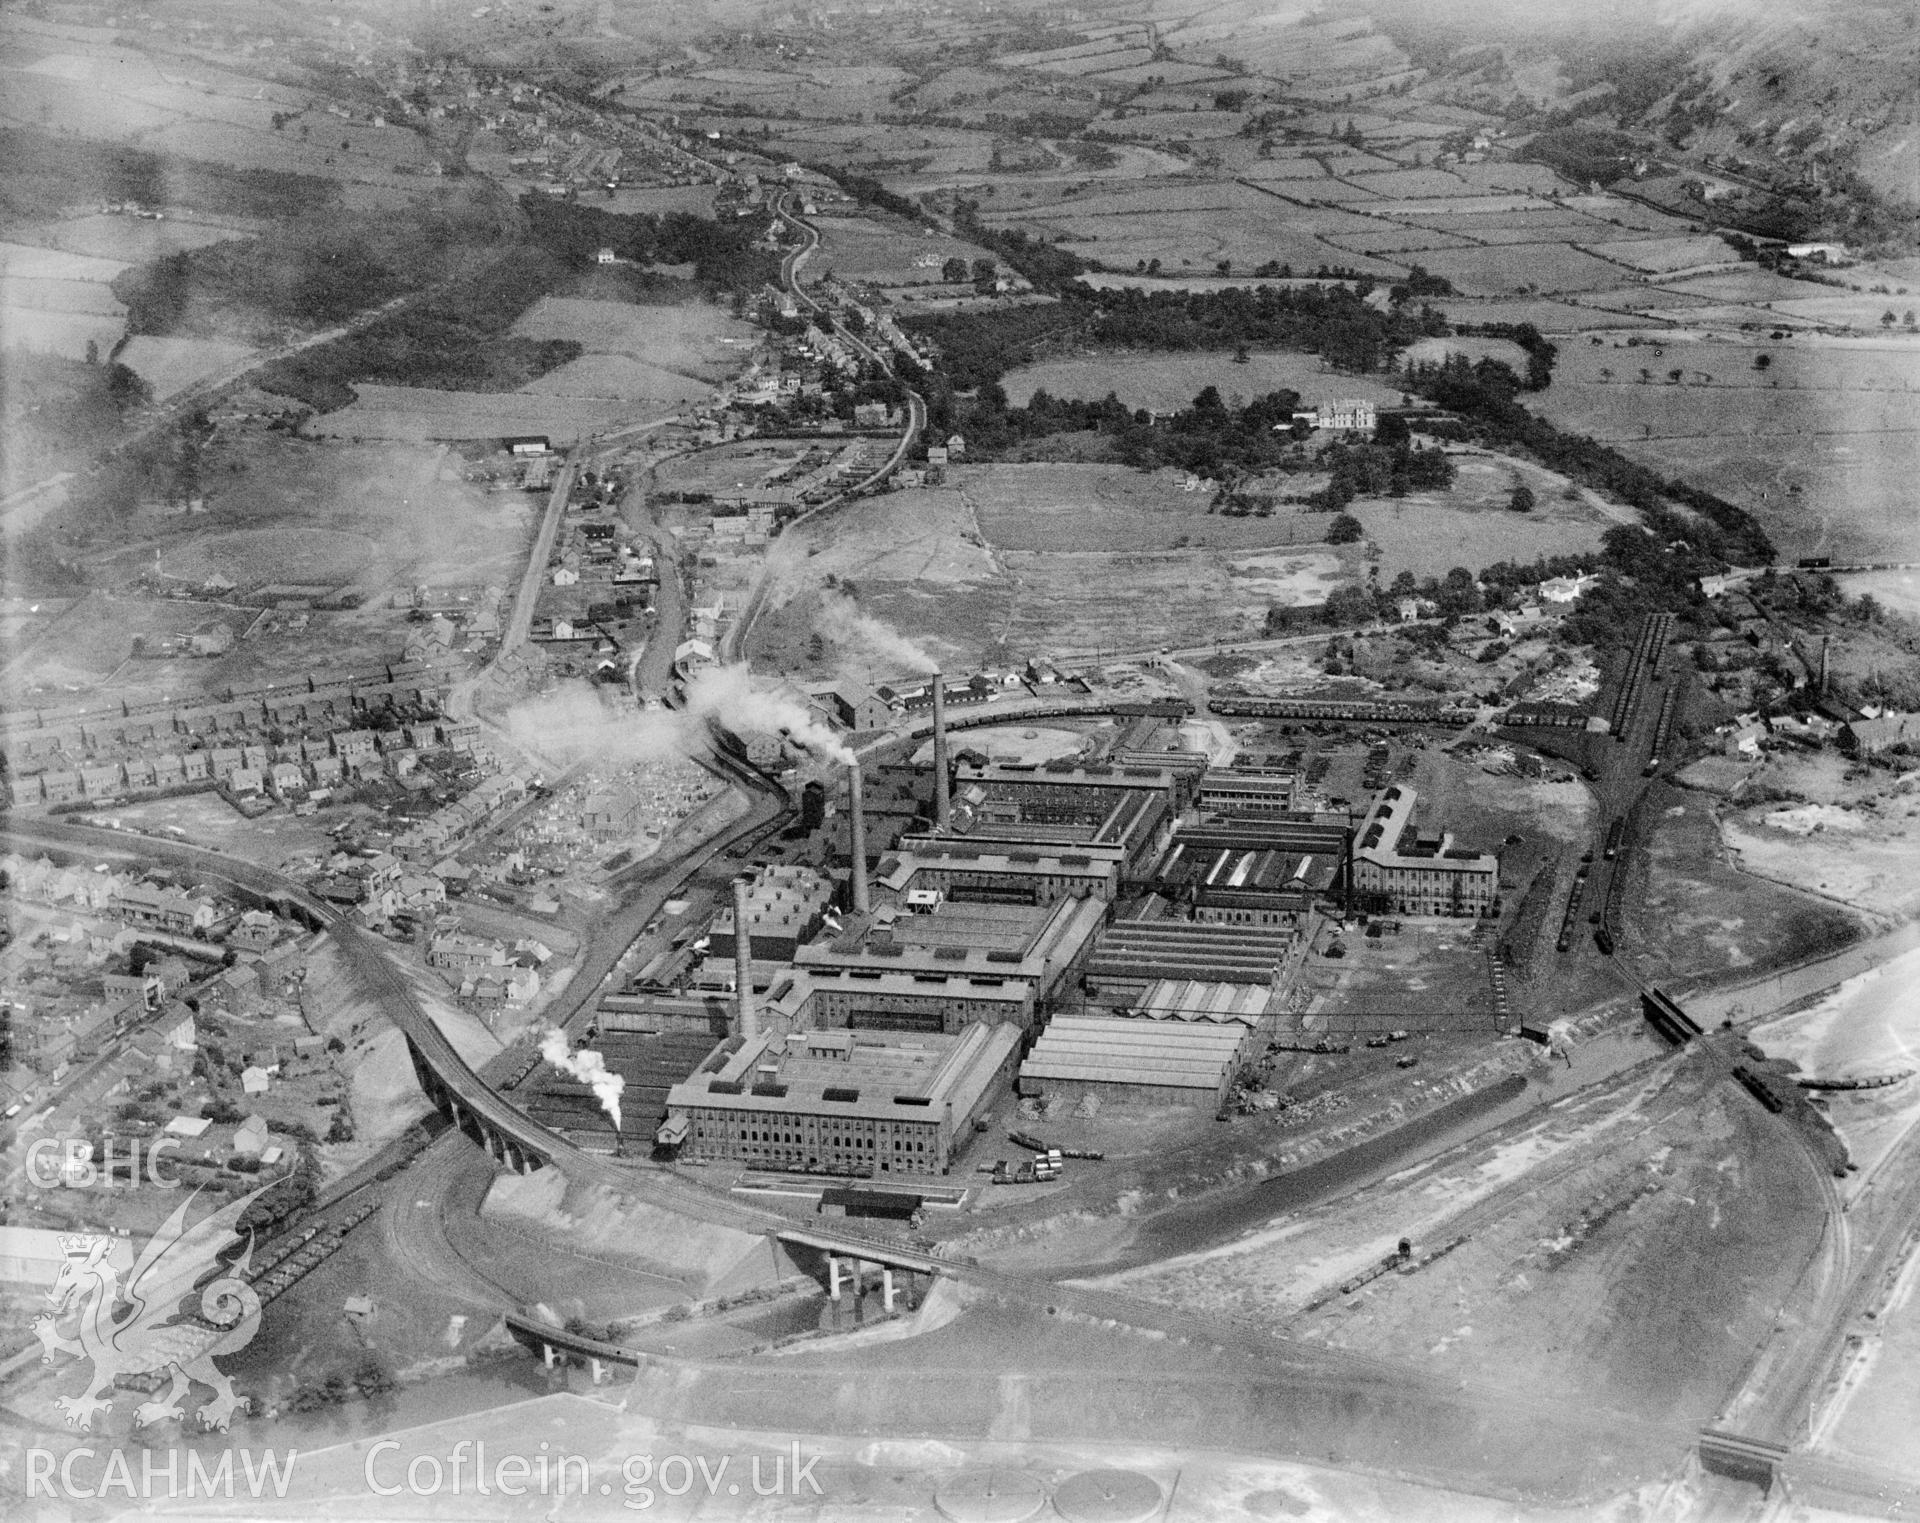 View of Mond Nickel Ltd., Clydach, oblique aerial view. 5?x4? black and white glass plate negative.